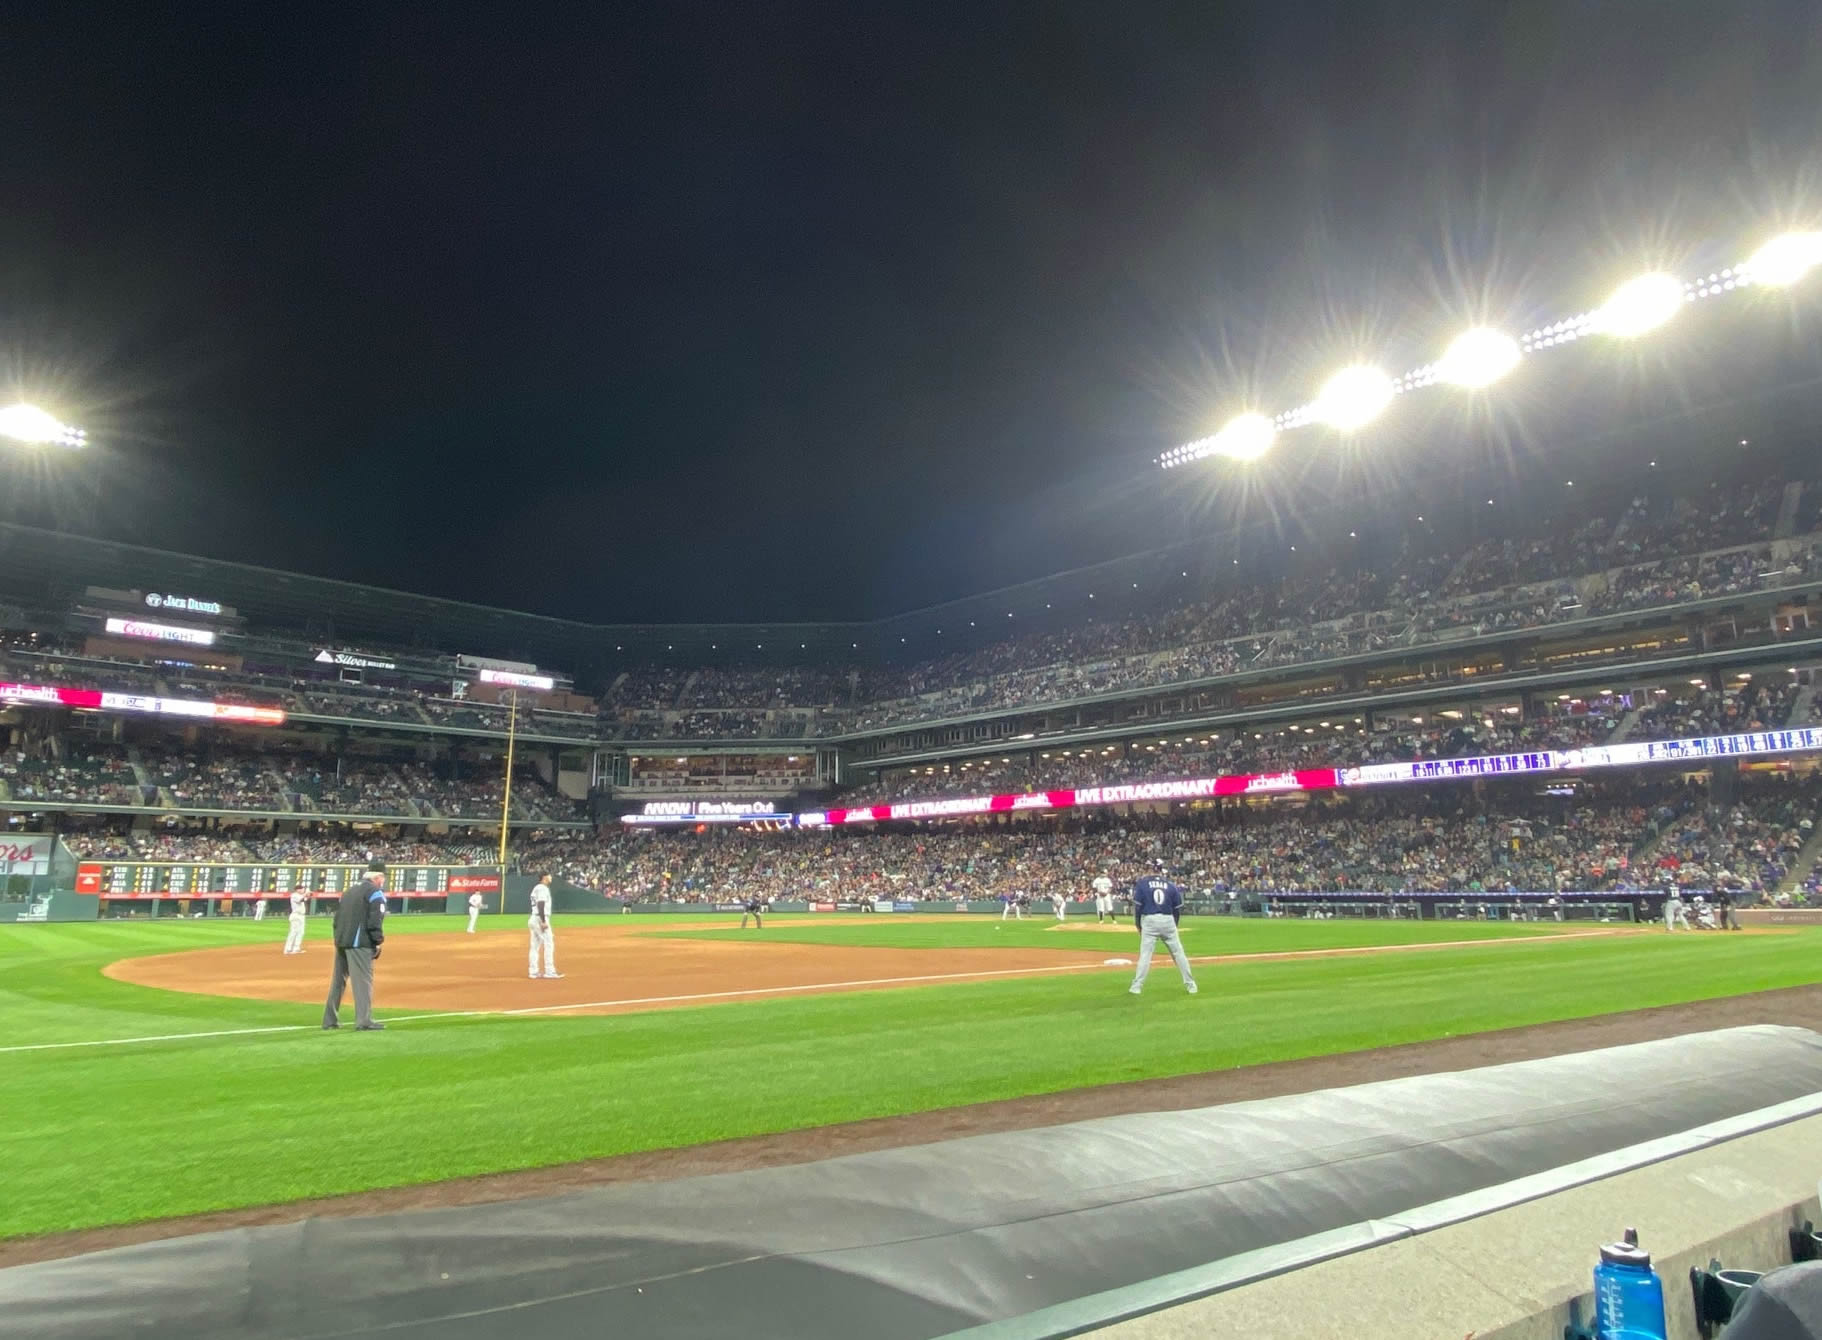 section 142, row 1 seat view  - coors field